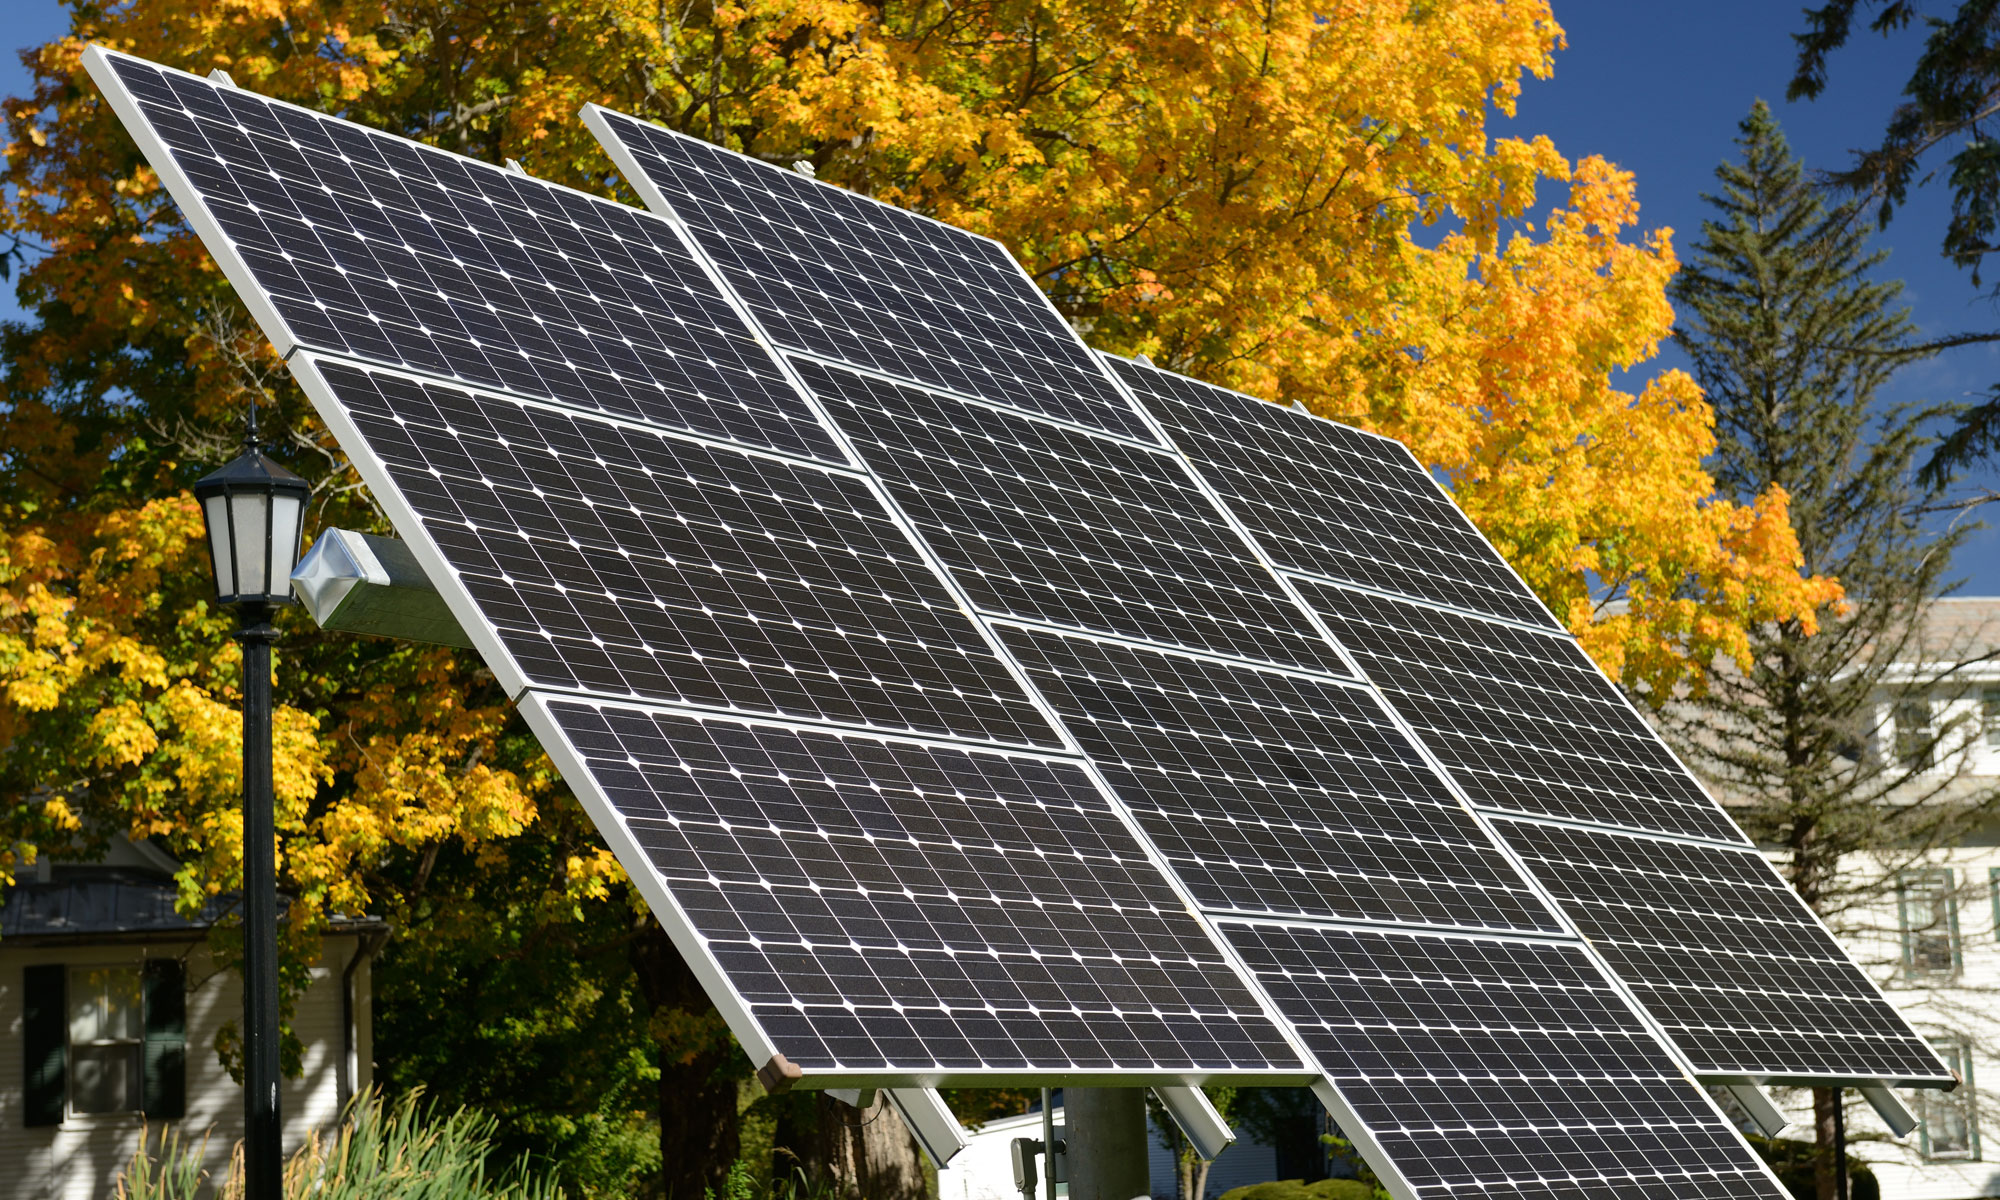 The path to an equitable solar incentive program for Massachusetts